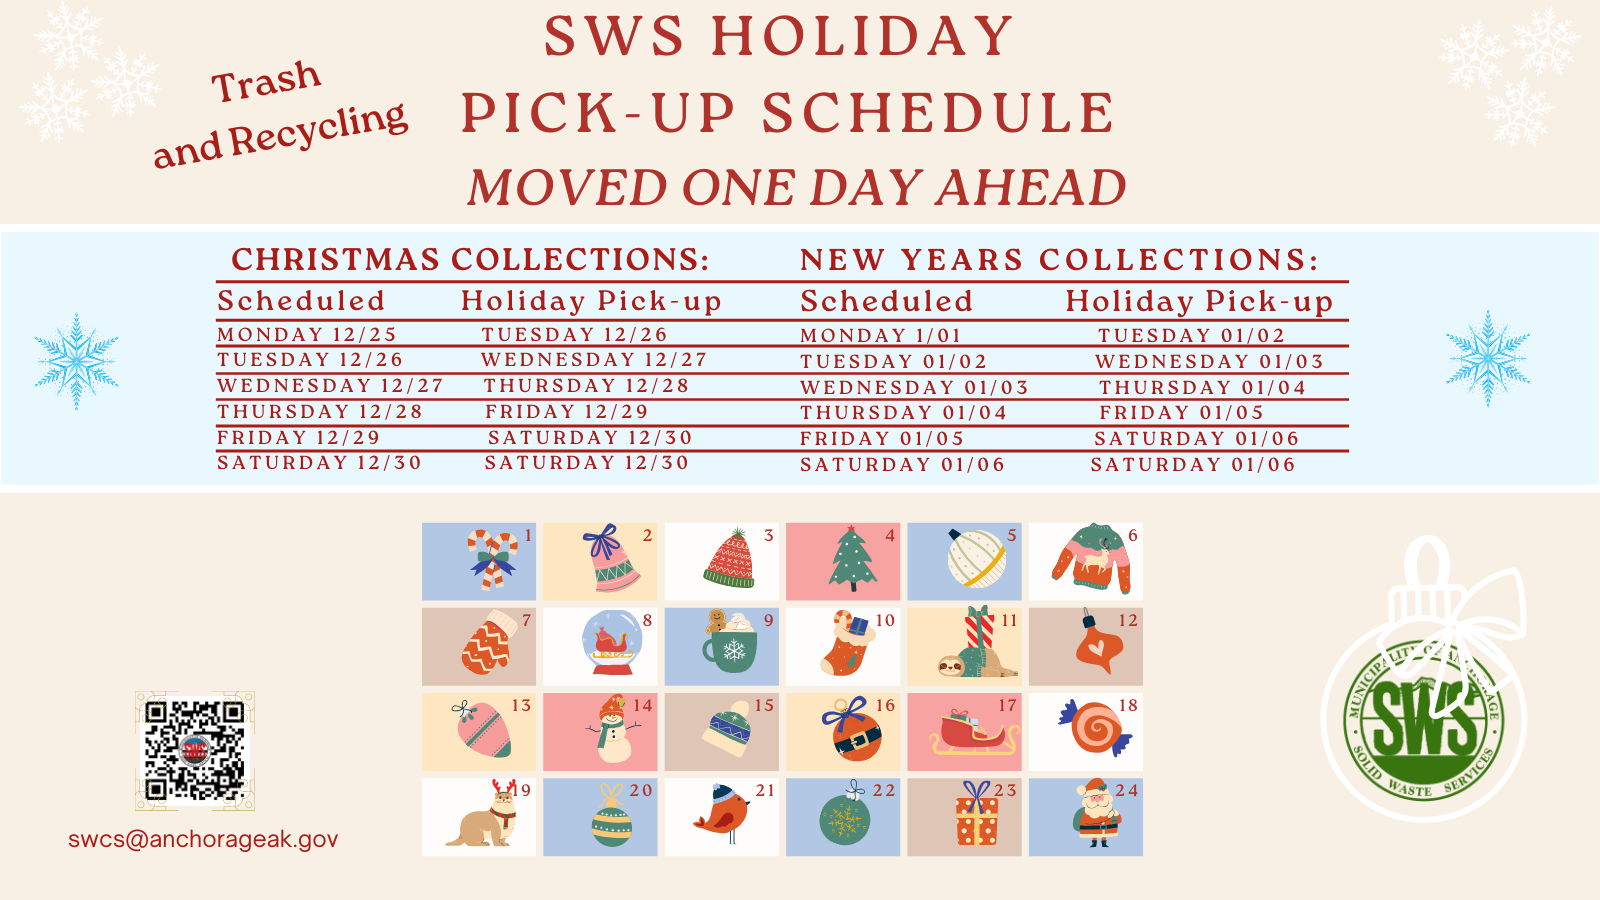 https://www.muni.org/Departments/SWS/SiteAssets/Pages/default/Holiday%20Pick%20up%20Schedule%20.png